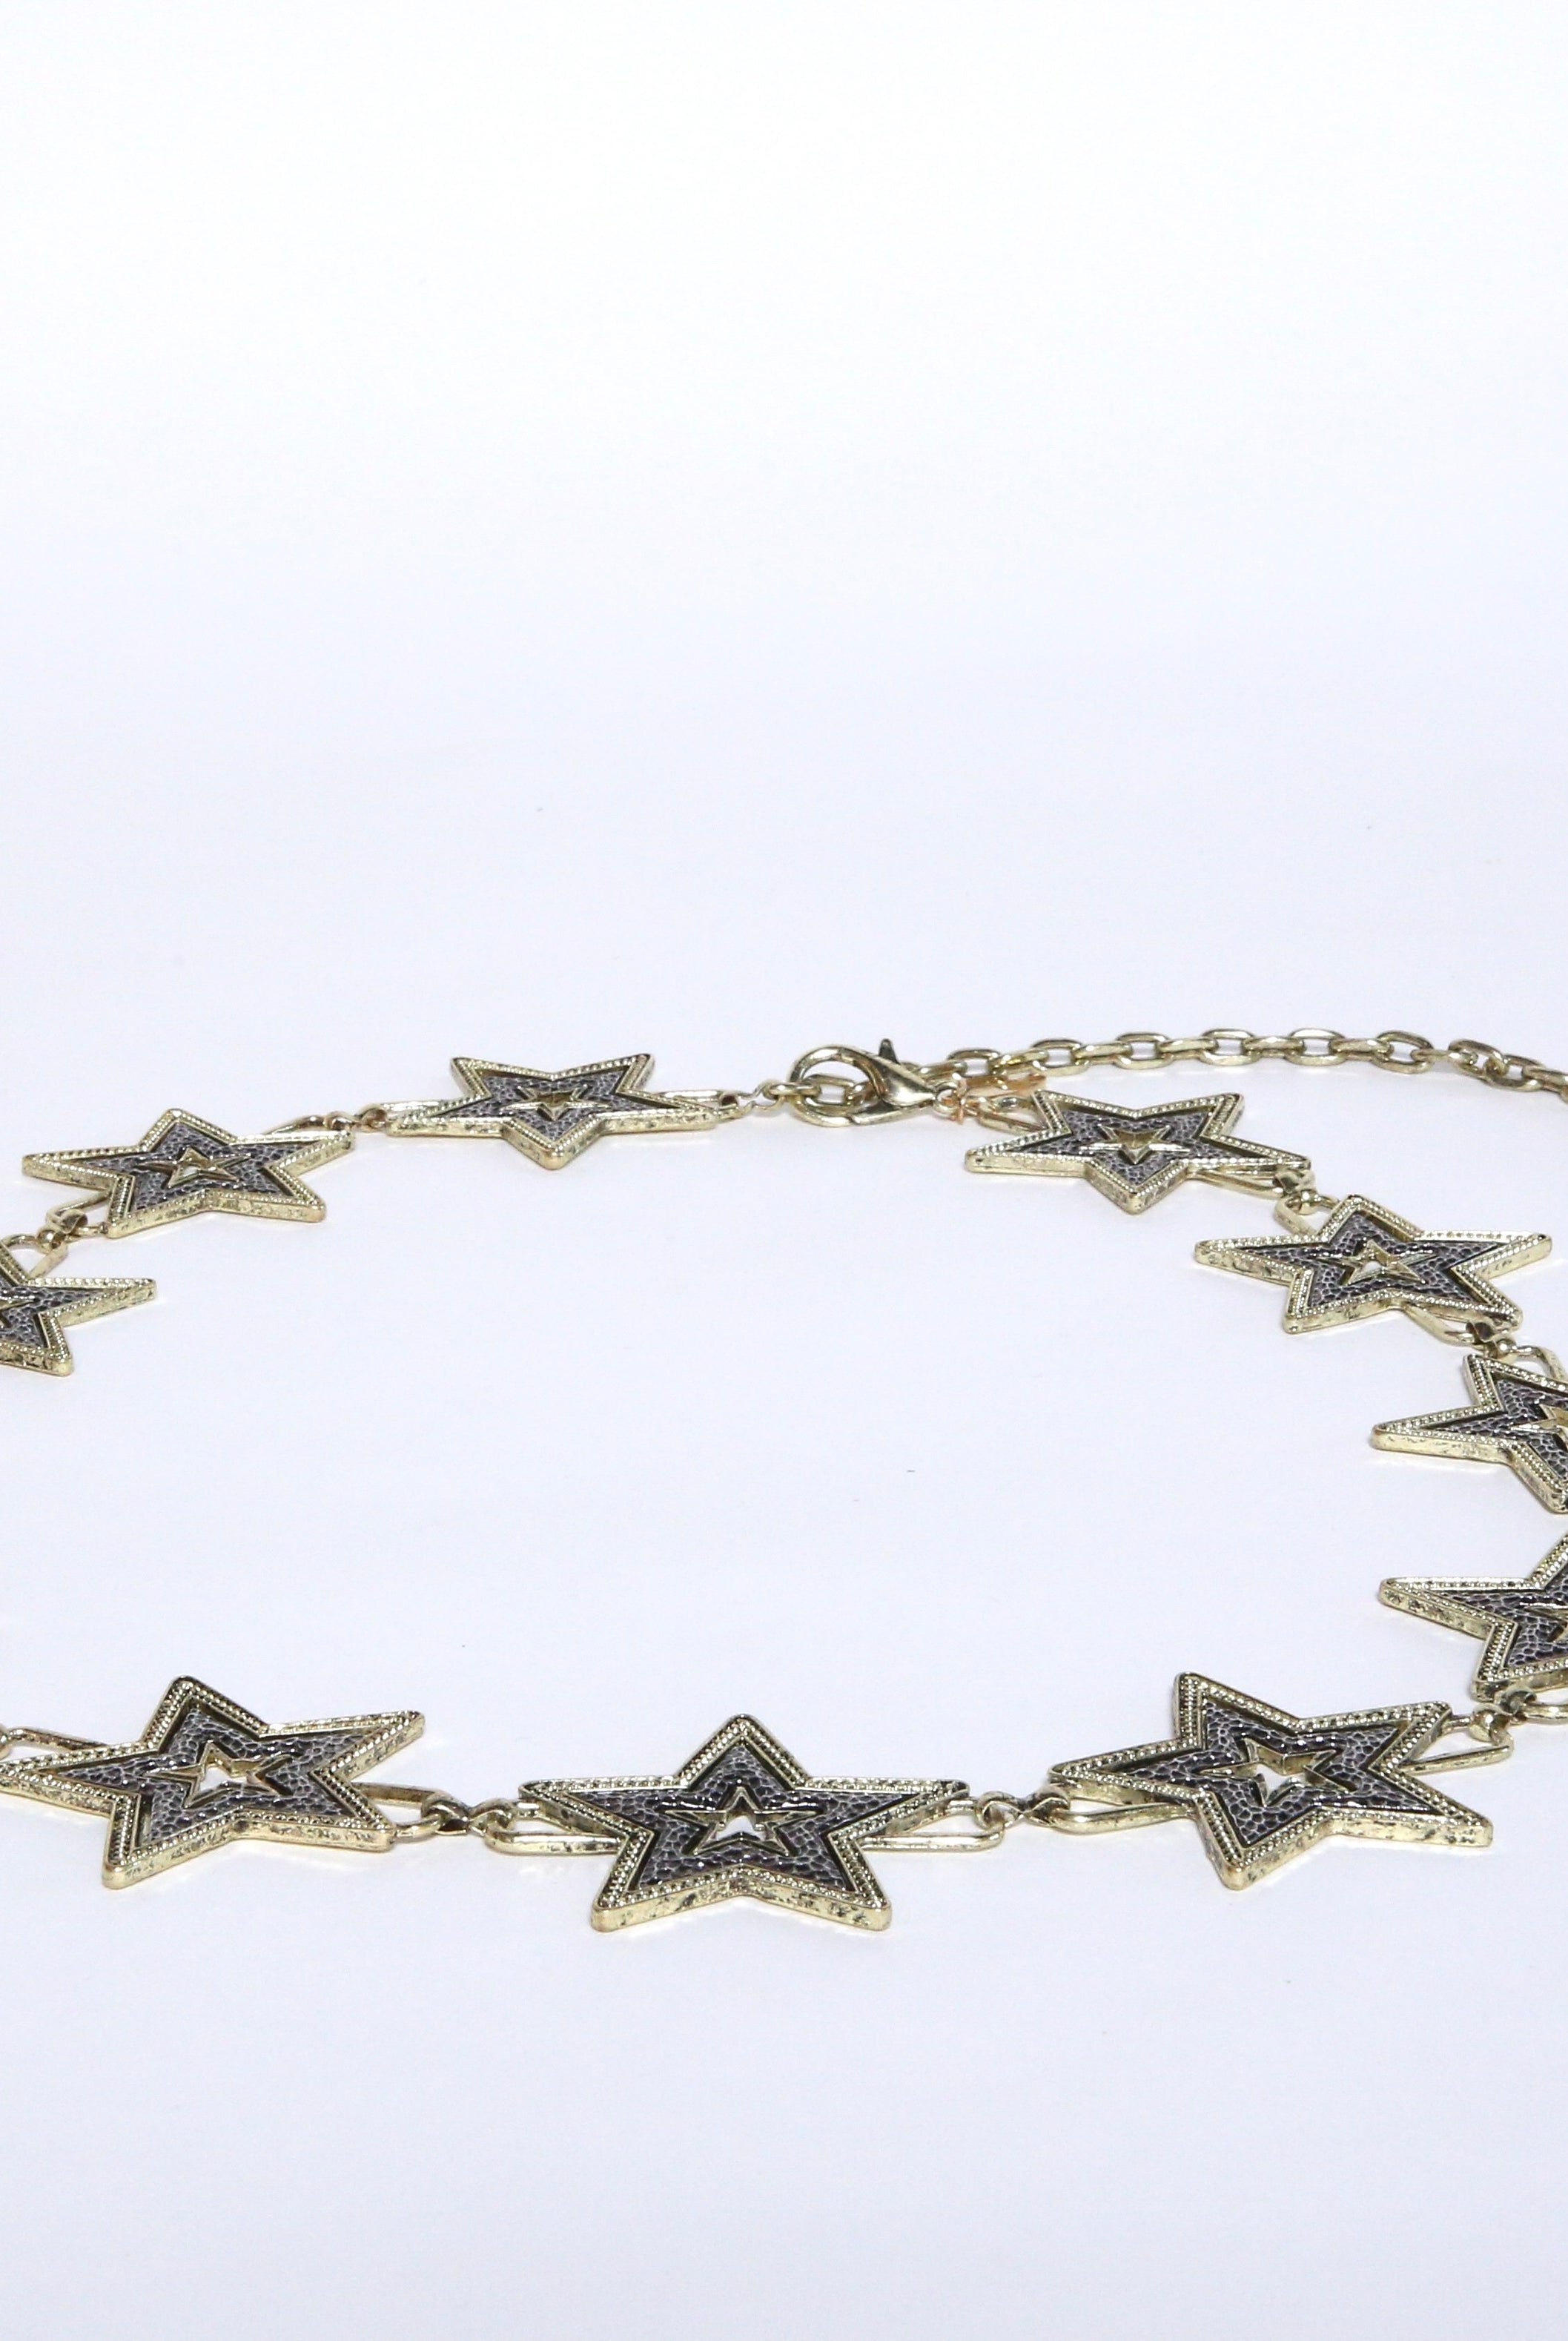 Gold and silver chain metal star belt that is one size fits all.